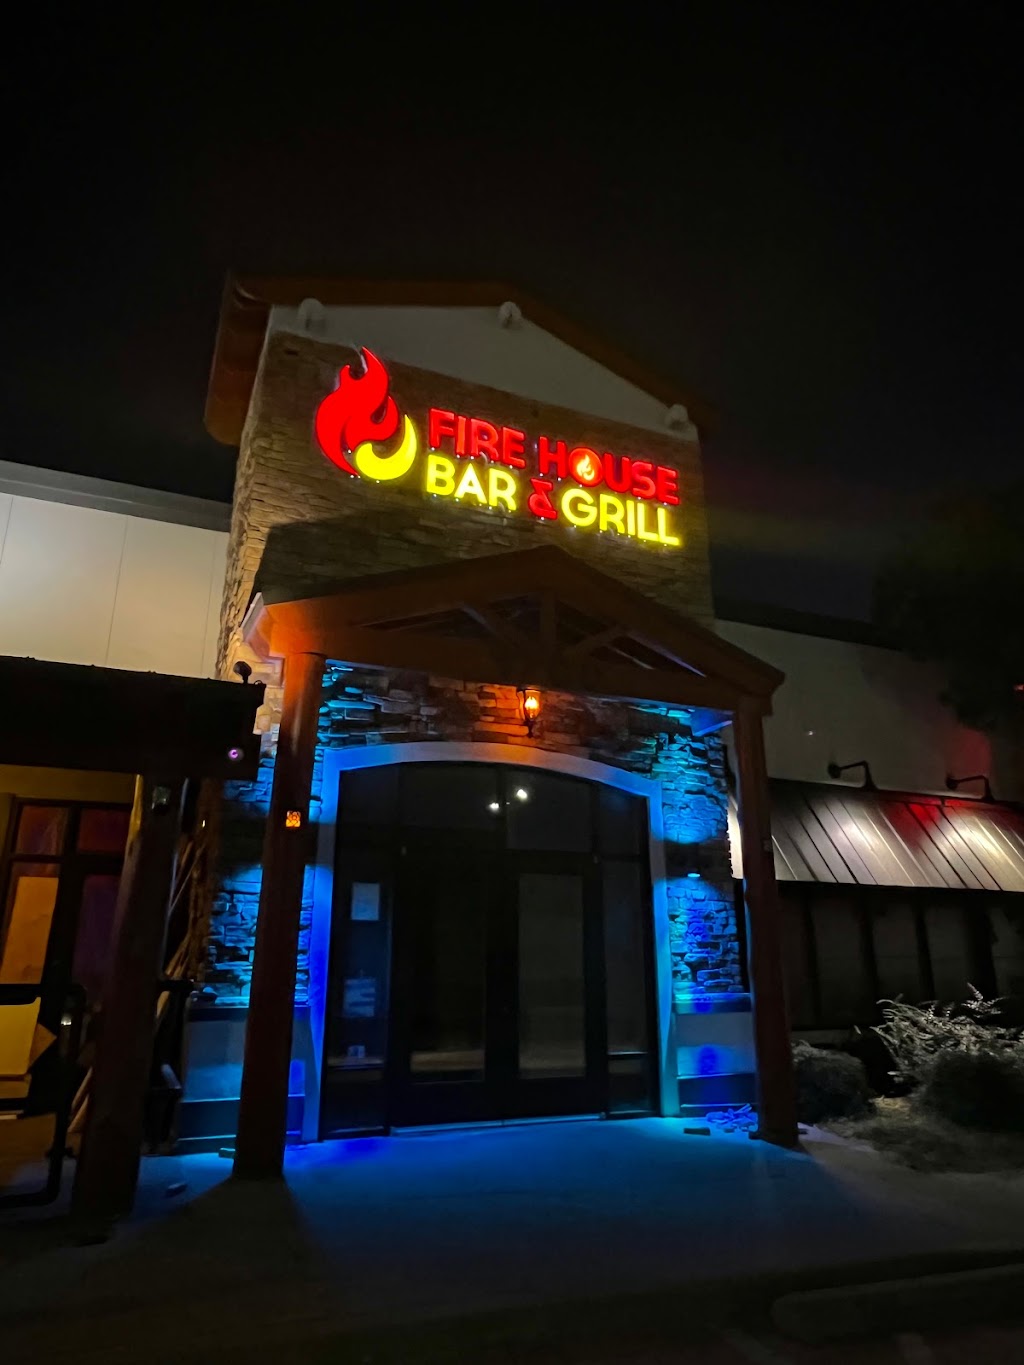 FireHouse Bar and Grill | restaurant | 1700 Airport Fwy, Bedford, TX 76022, USA | 8175080038 OR +1 817-508-0038